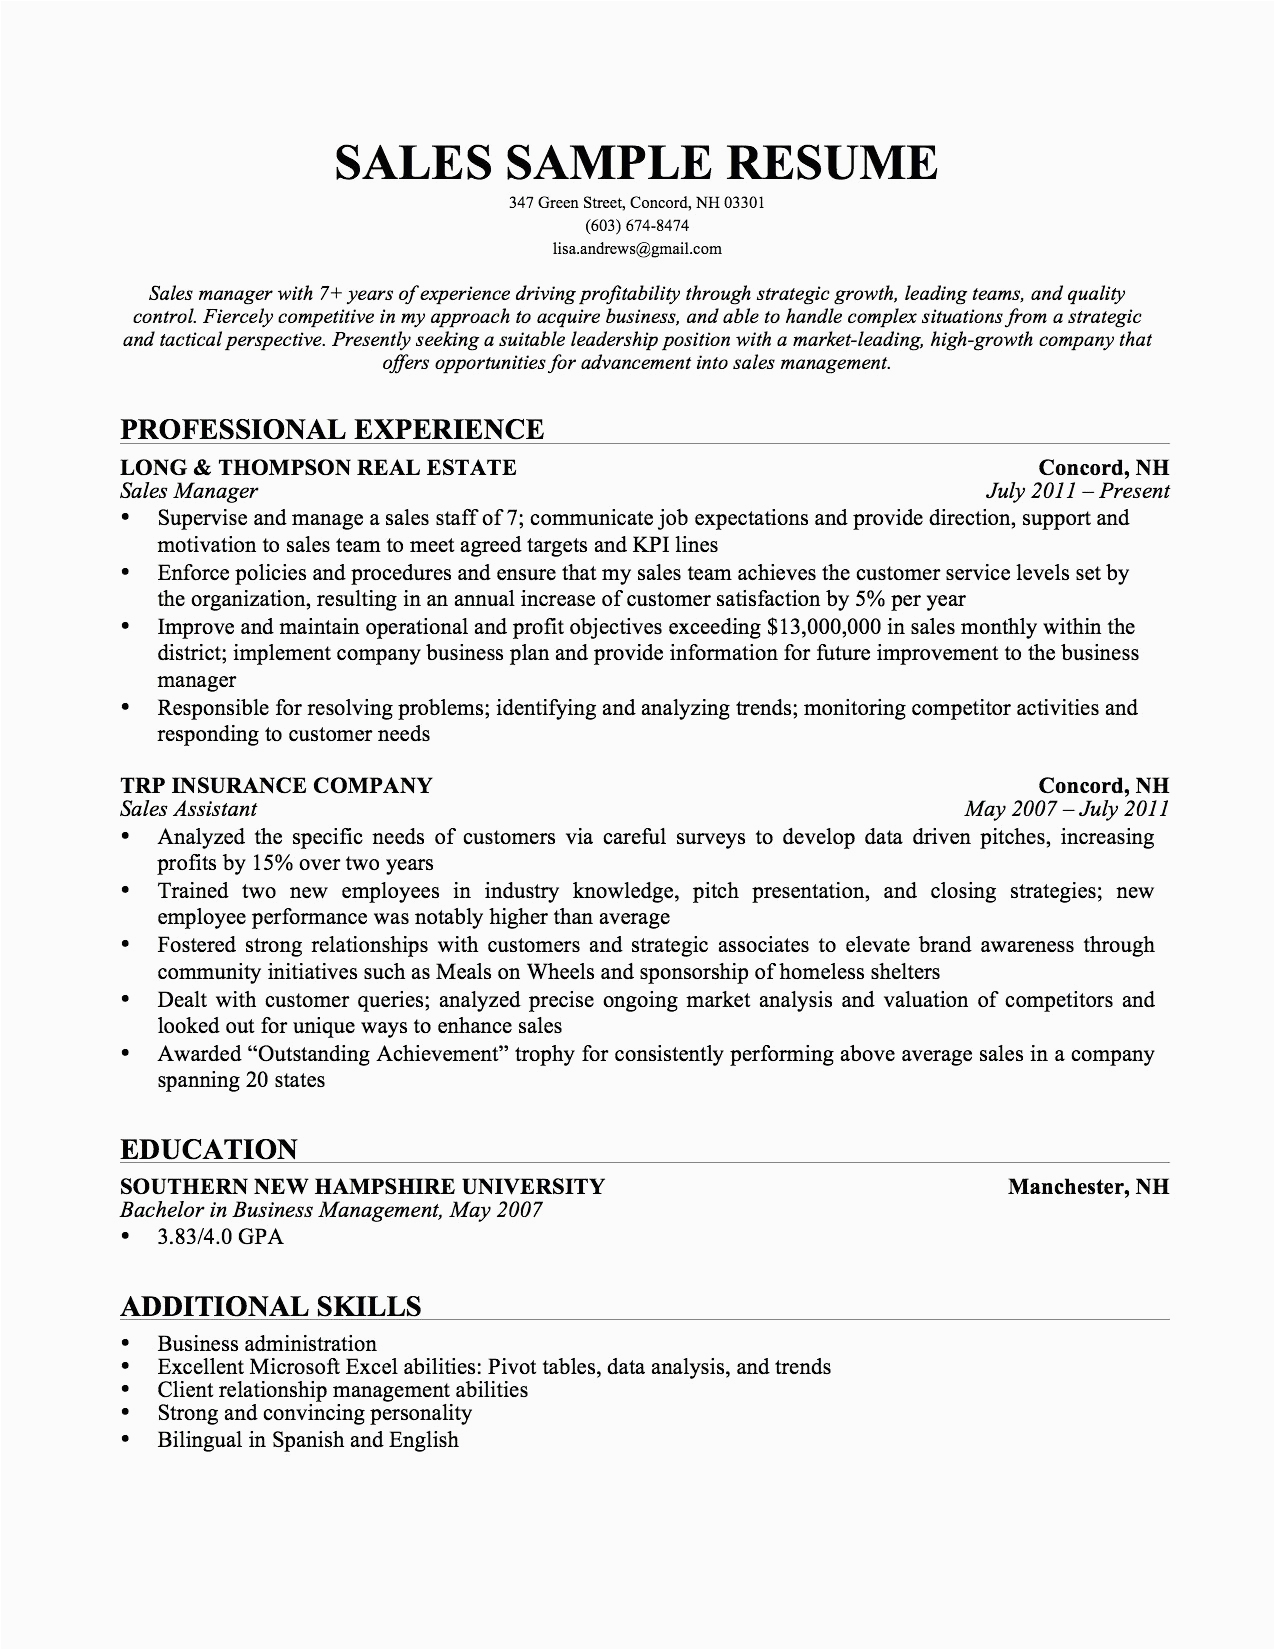 Resume Sample for Long Term Employment 12 13 Long Term Employment Resume Examples